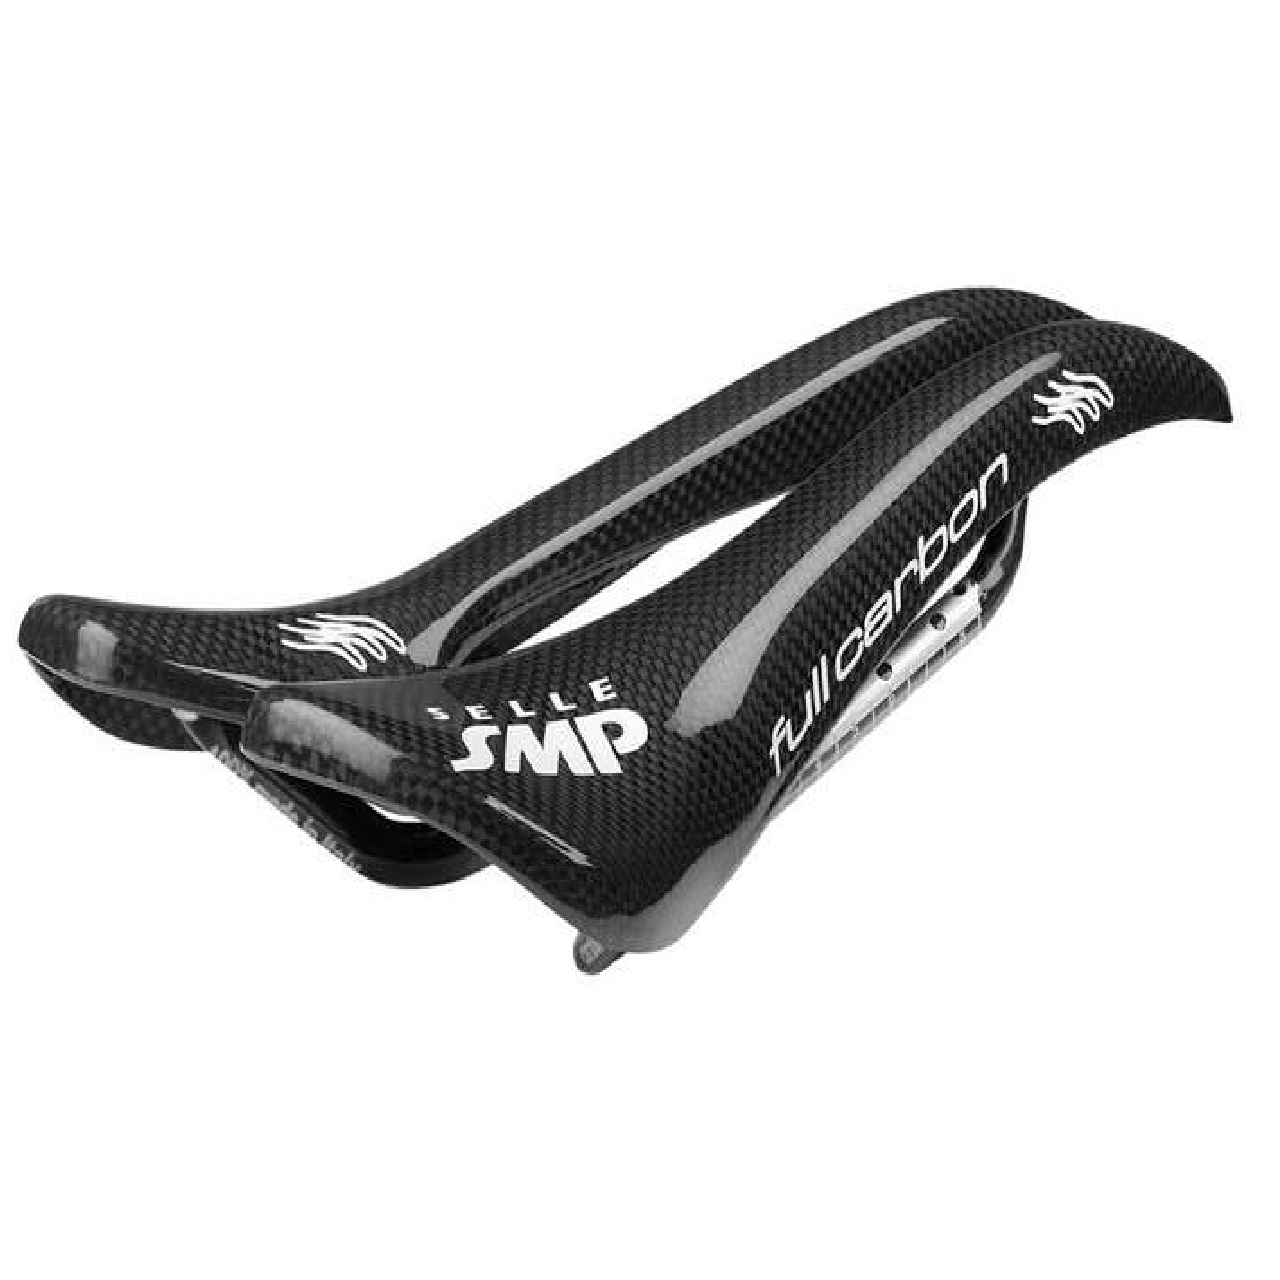 Selle SMP Full Carbon Pro Bike Saddle with Carbon Rails